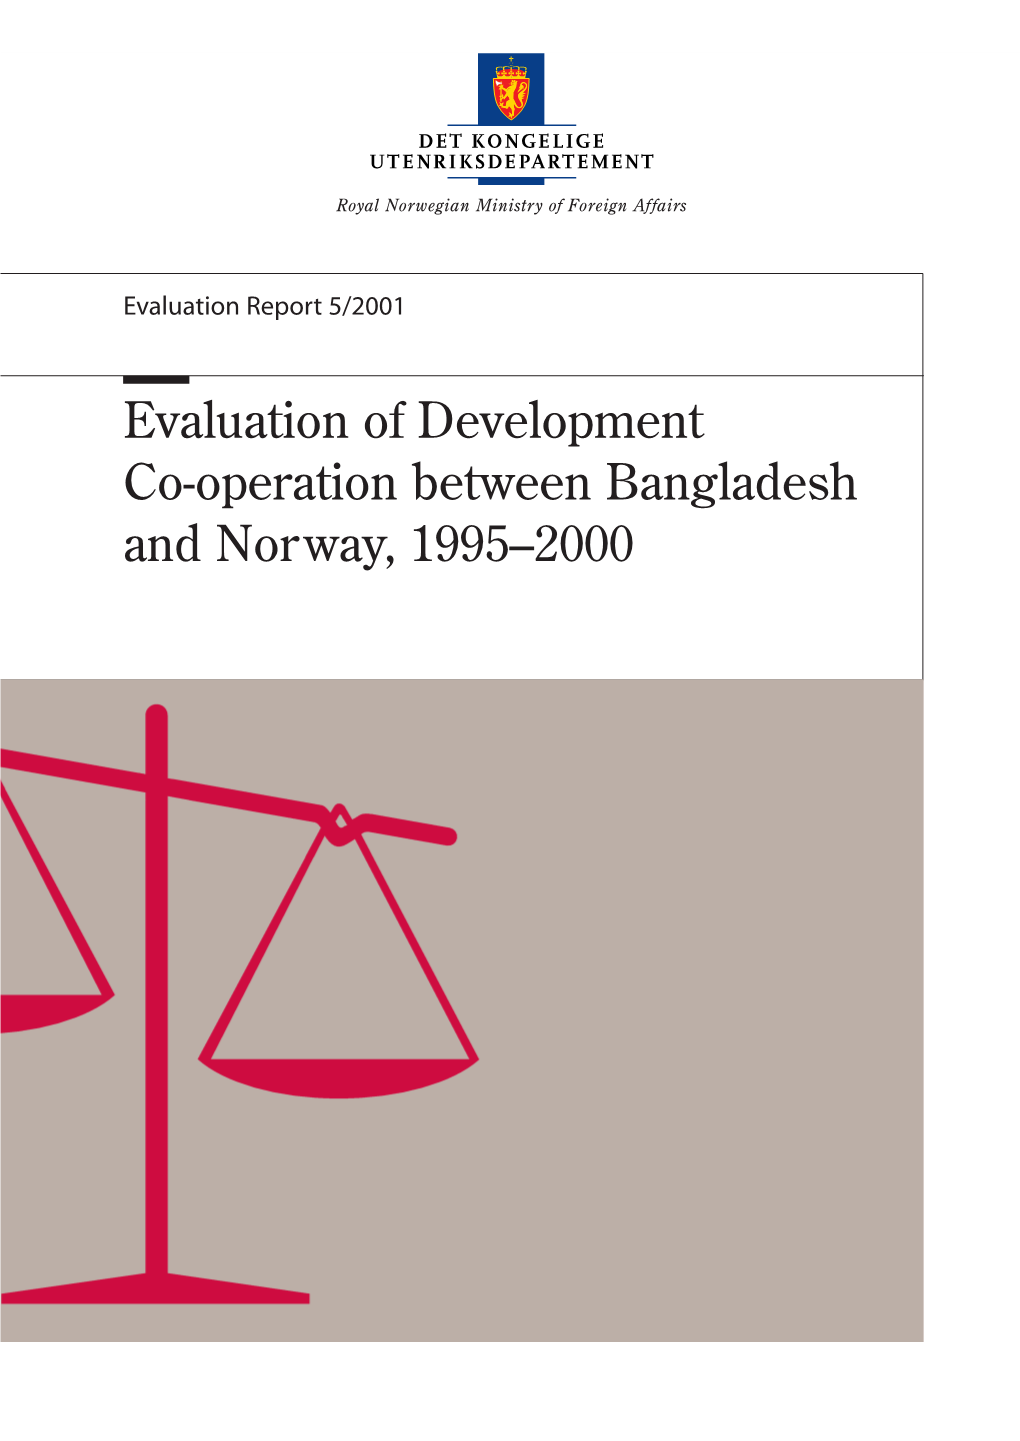 Evaluation of Development Co-Operation Between Bangladesh and Norway, 1995–2000 Information from the Royal Norwegian Ministry of Foreign Affairs